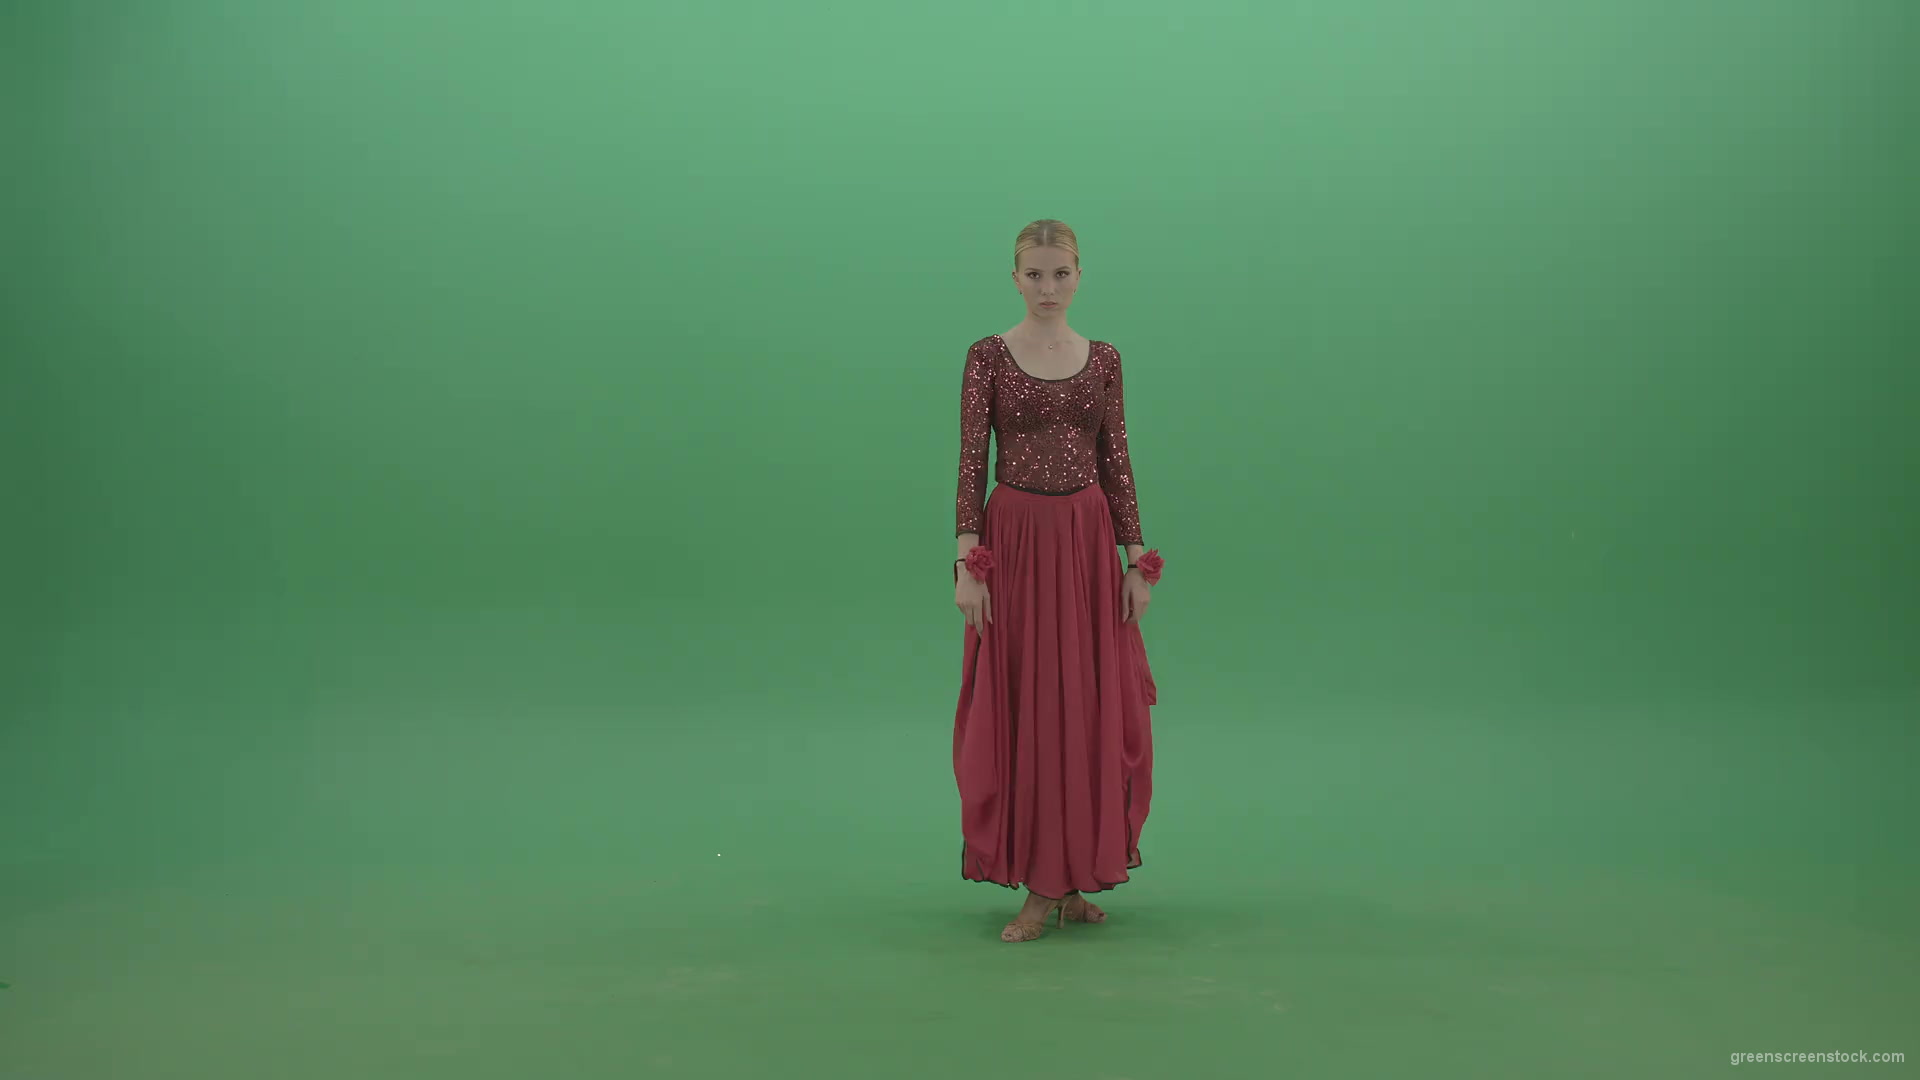 Passion-elegant-girl-in-red-dress-dancing-flamenco-isolated-on-green-screen-4K-Video-Footage-1920_001 Green Screen Stock